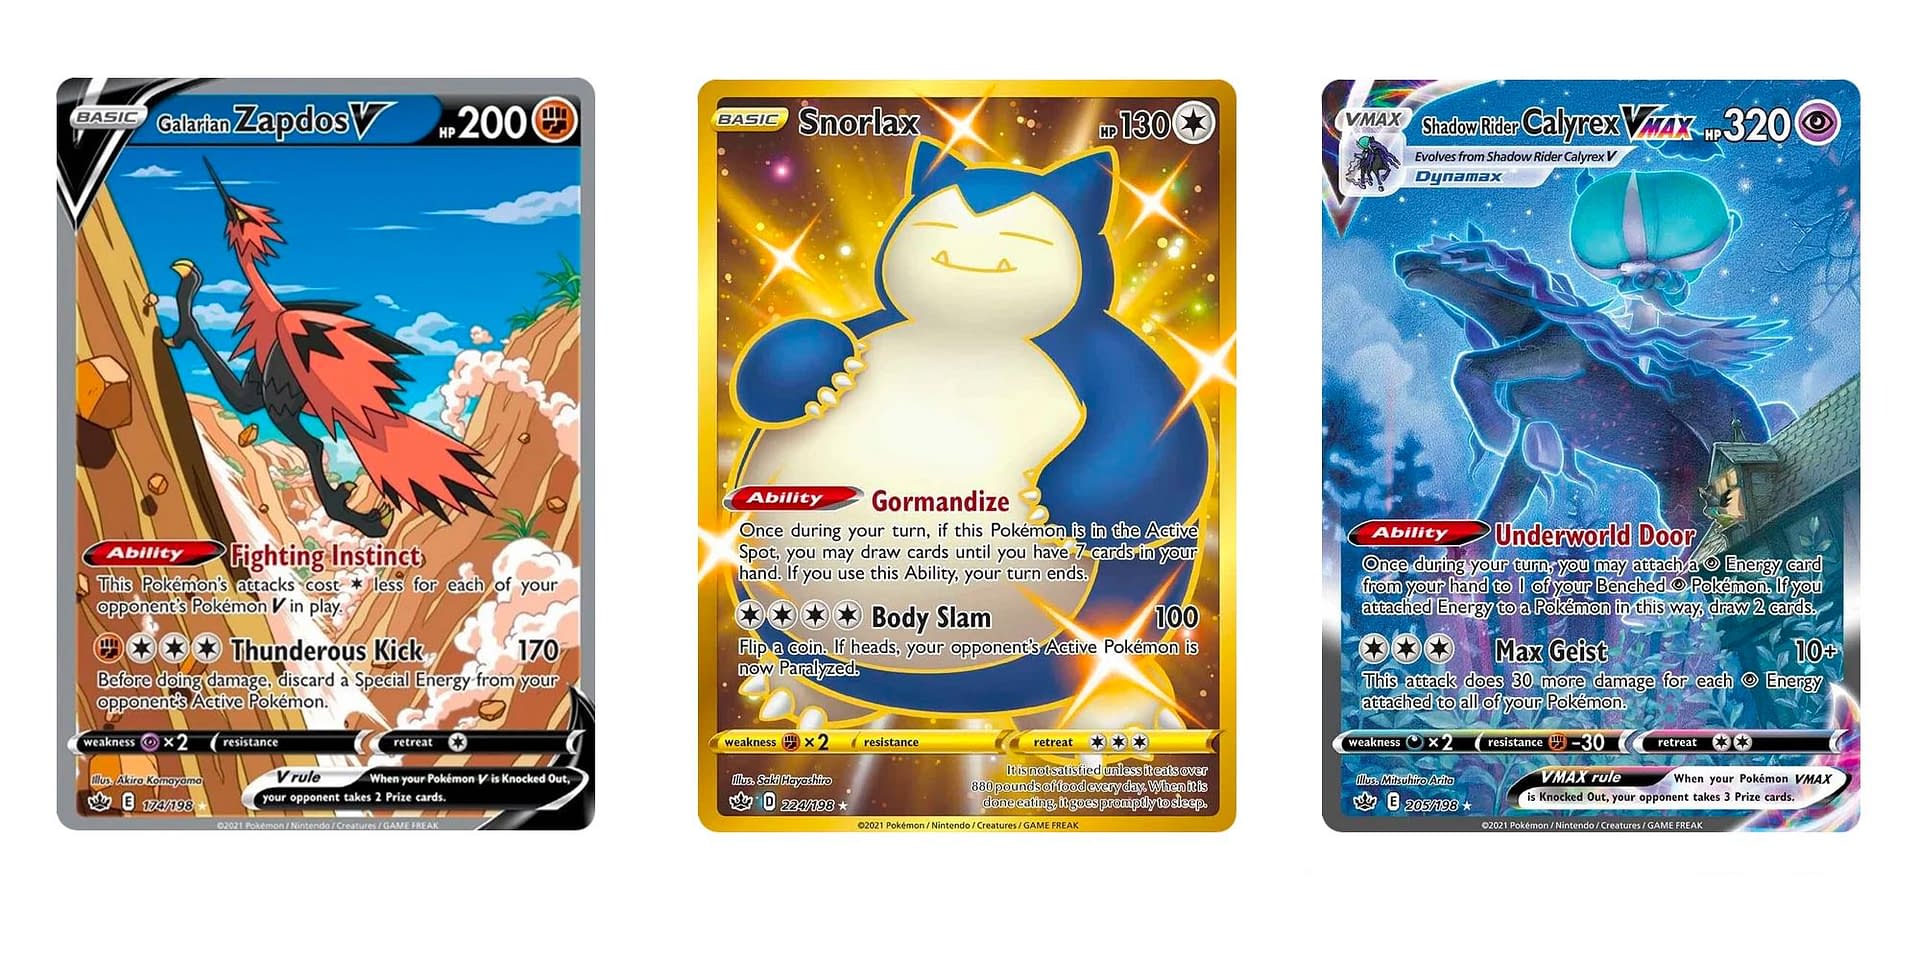 The 10 Most Expensive Pokémon Cards of 2021